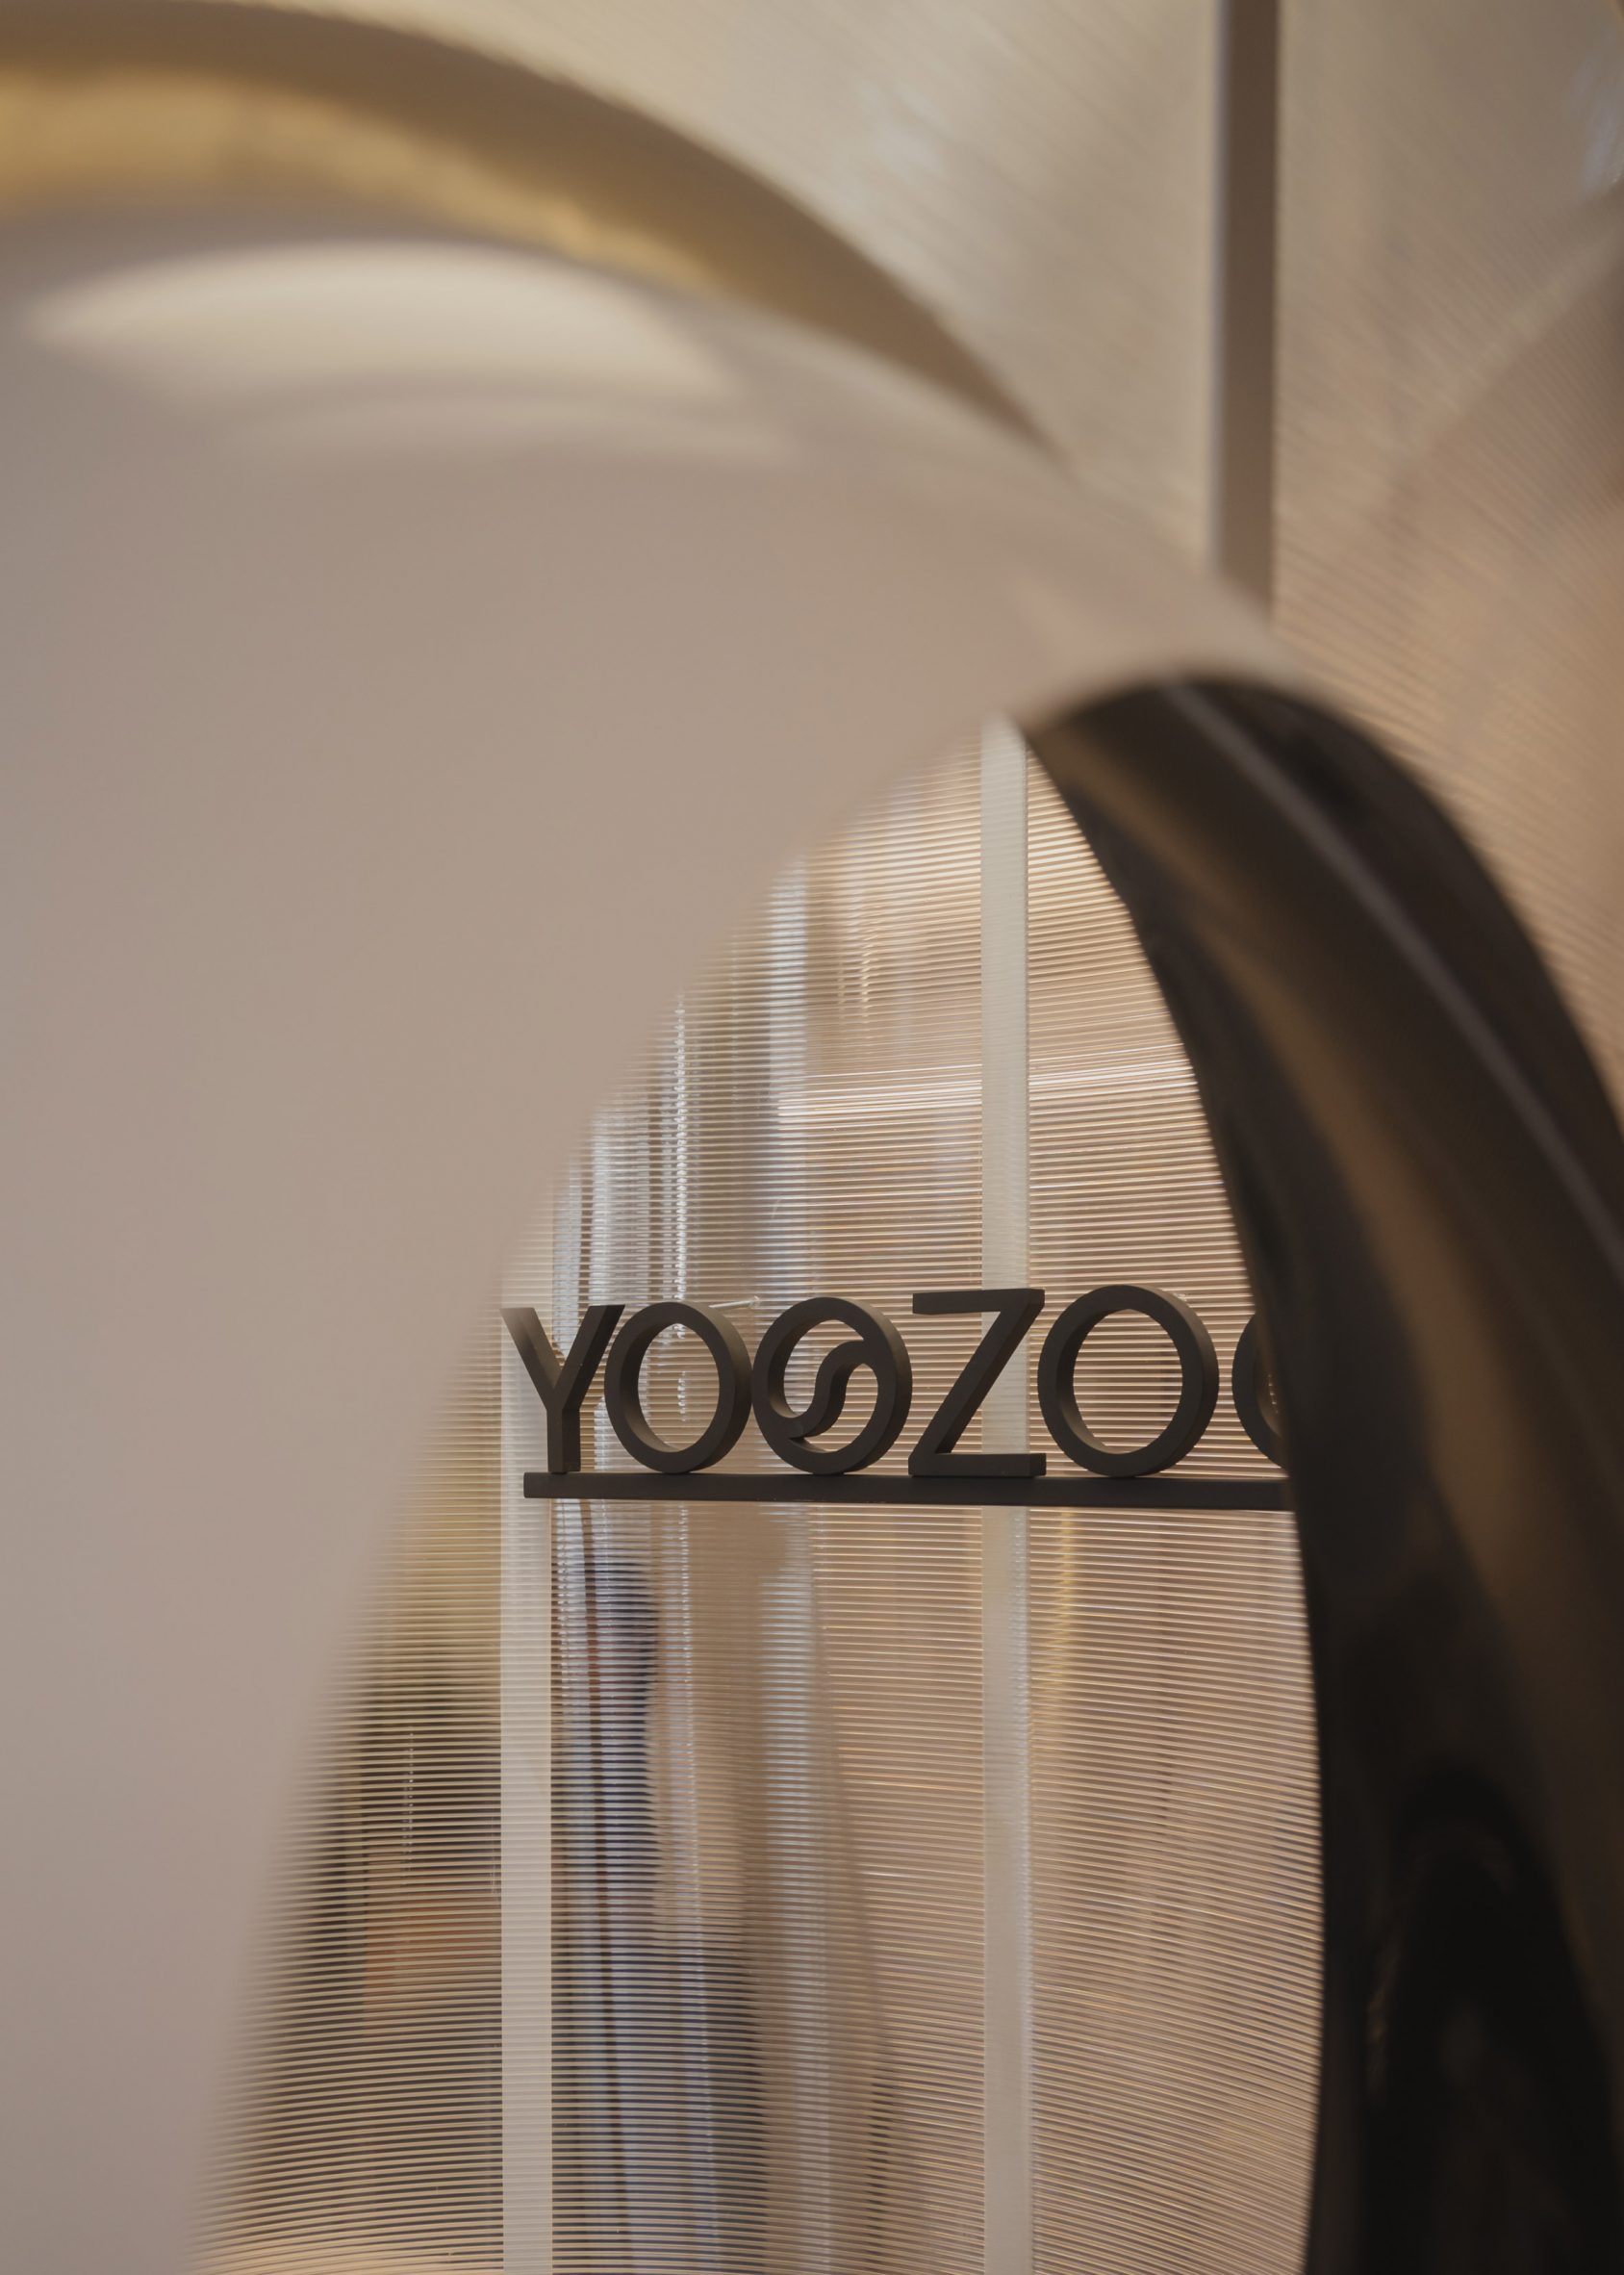 Yoozoo logo affixed to a polycarbonate shell